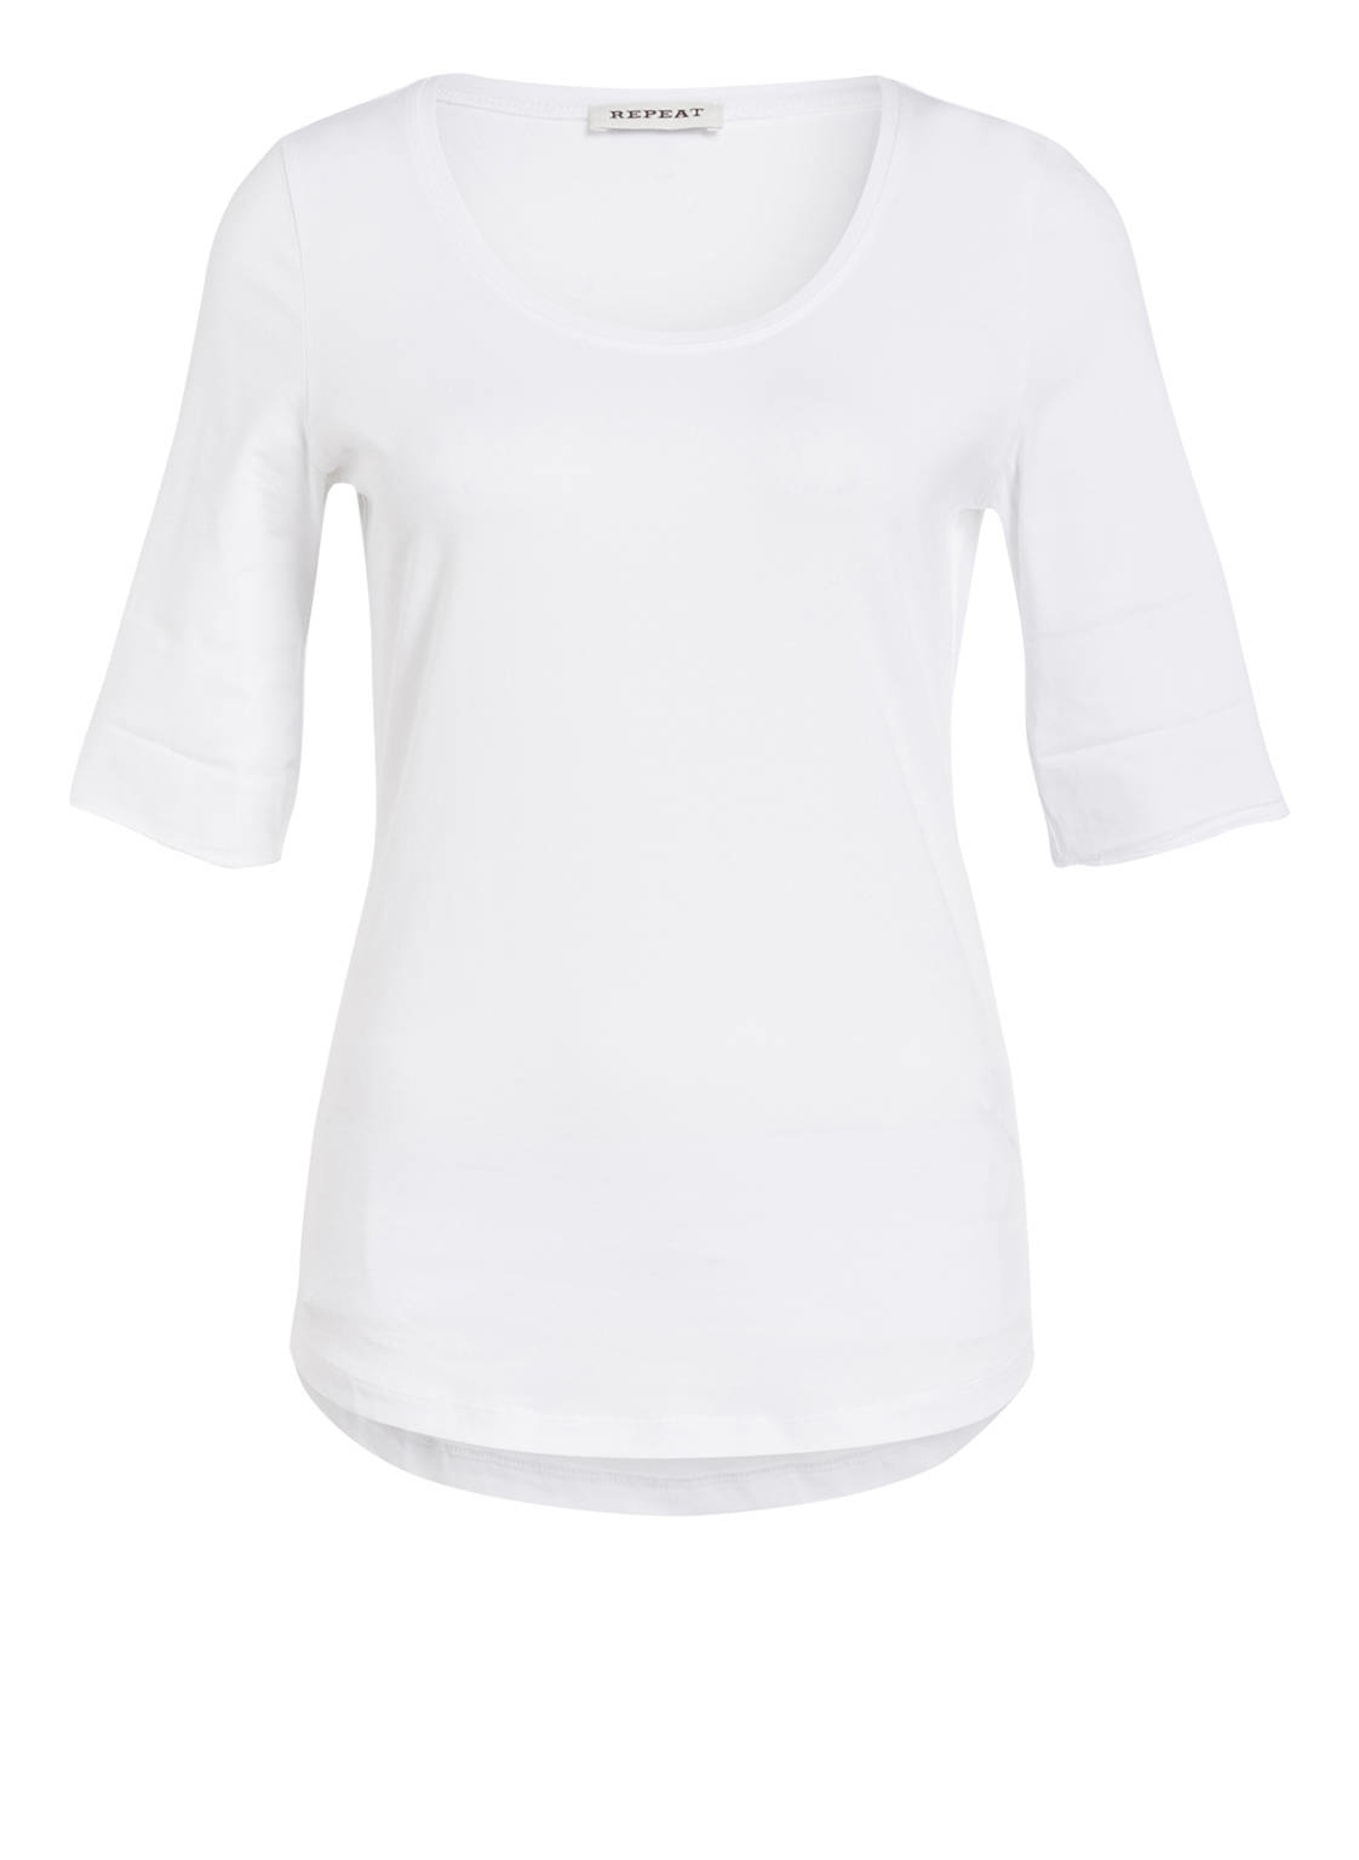 REPEAT T-shirt, Color: WHITE (Image 1)